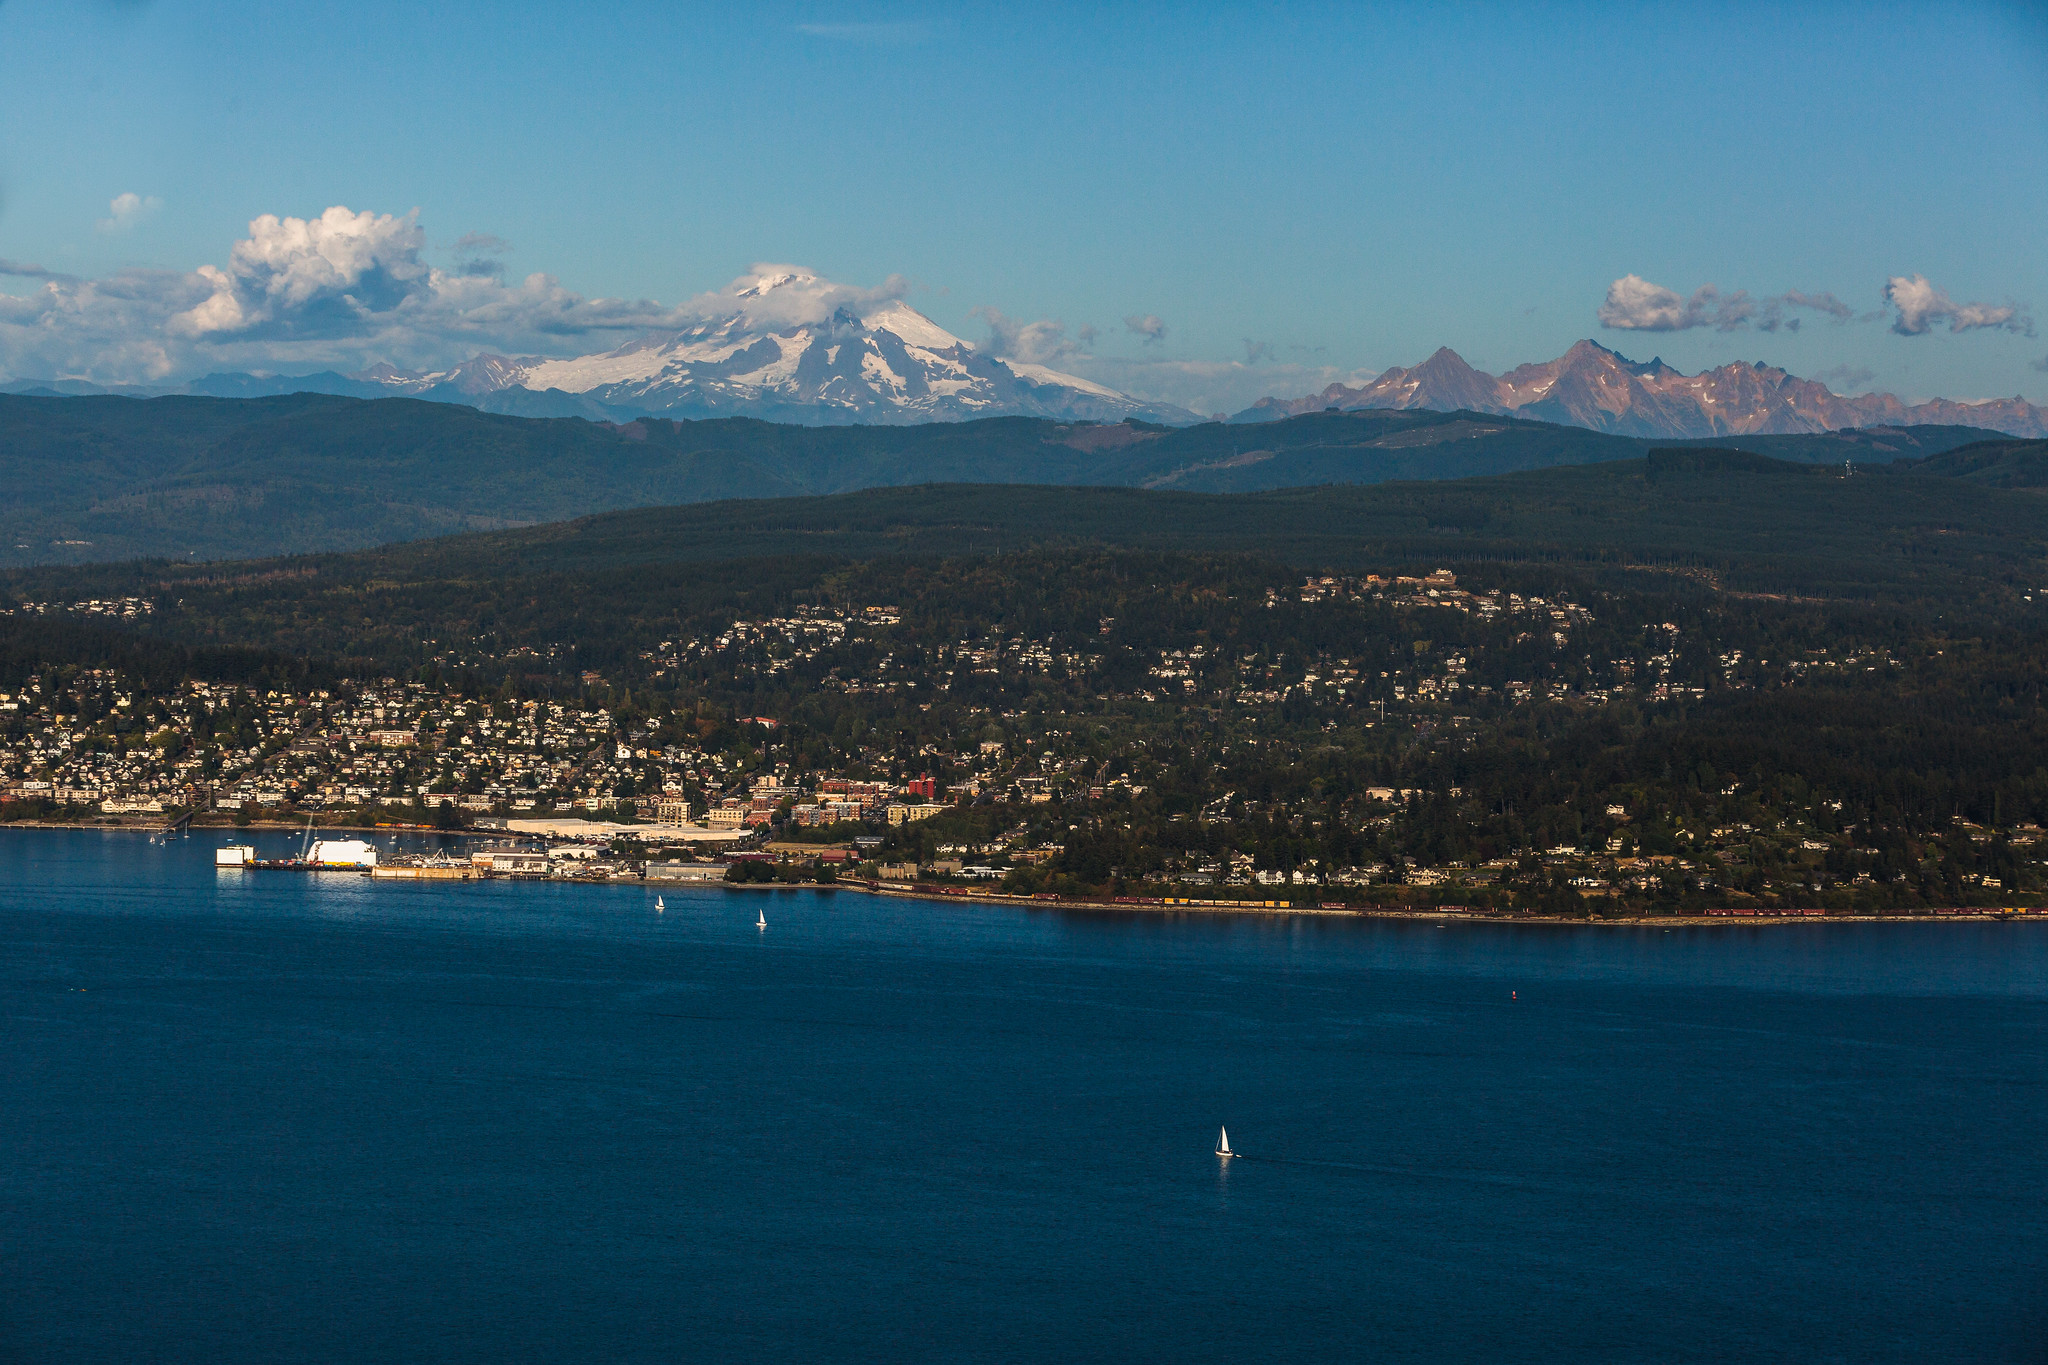 An aerial view of Bellingham on a sunny day. Mount Baker is visible in the background, and the city of Bellingham and Western's campus are visible. Bellingham Bay fills the lower third of the photo.